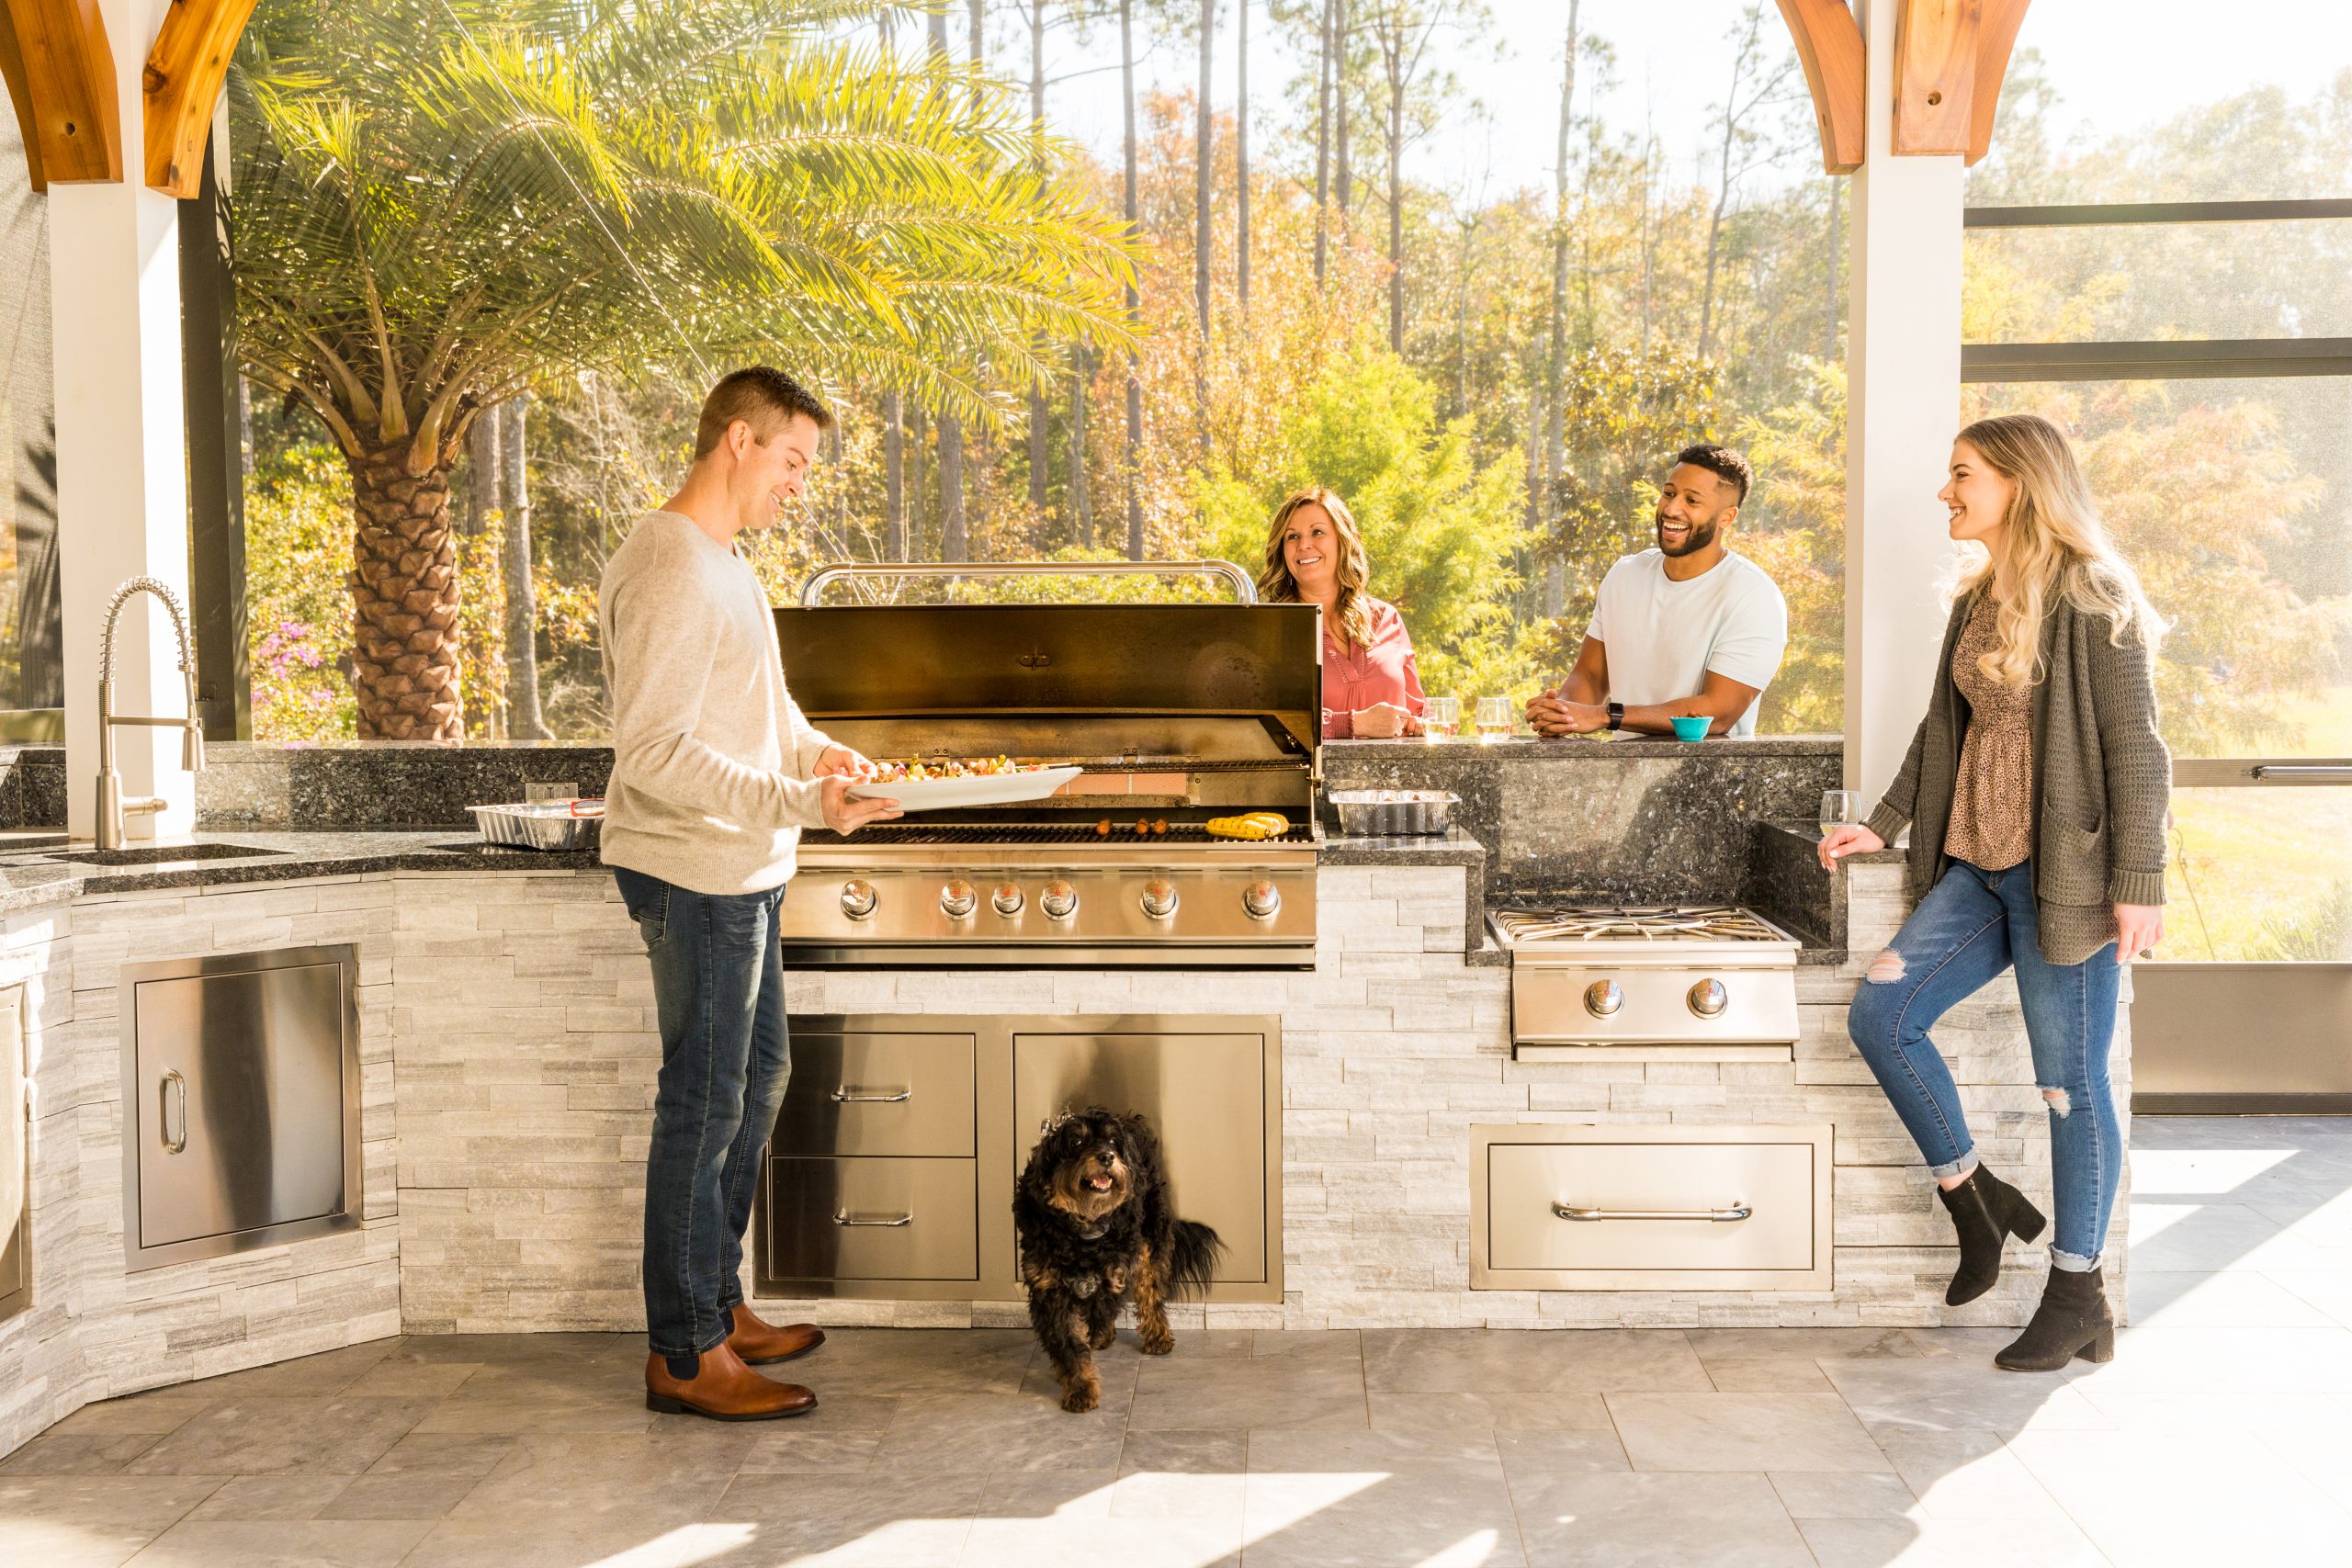 5 Tips to Protect Your Outdoor Kitchen This Winter